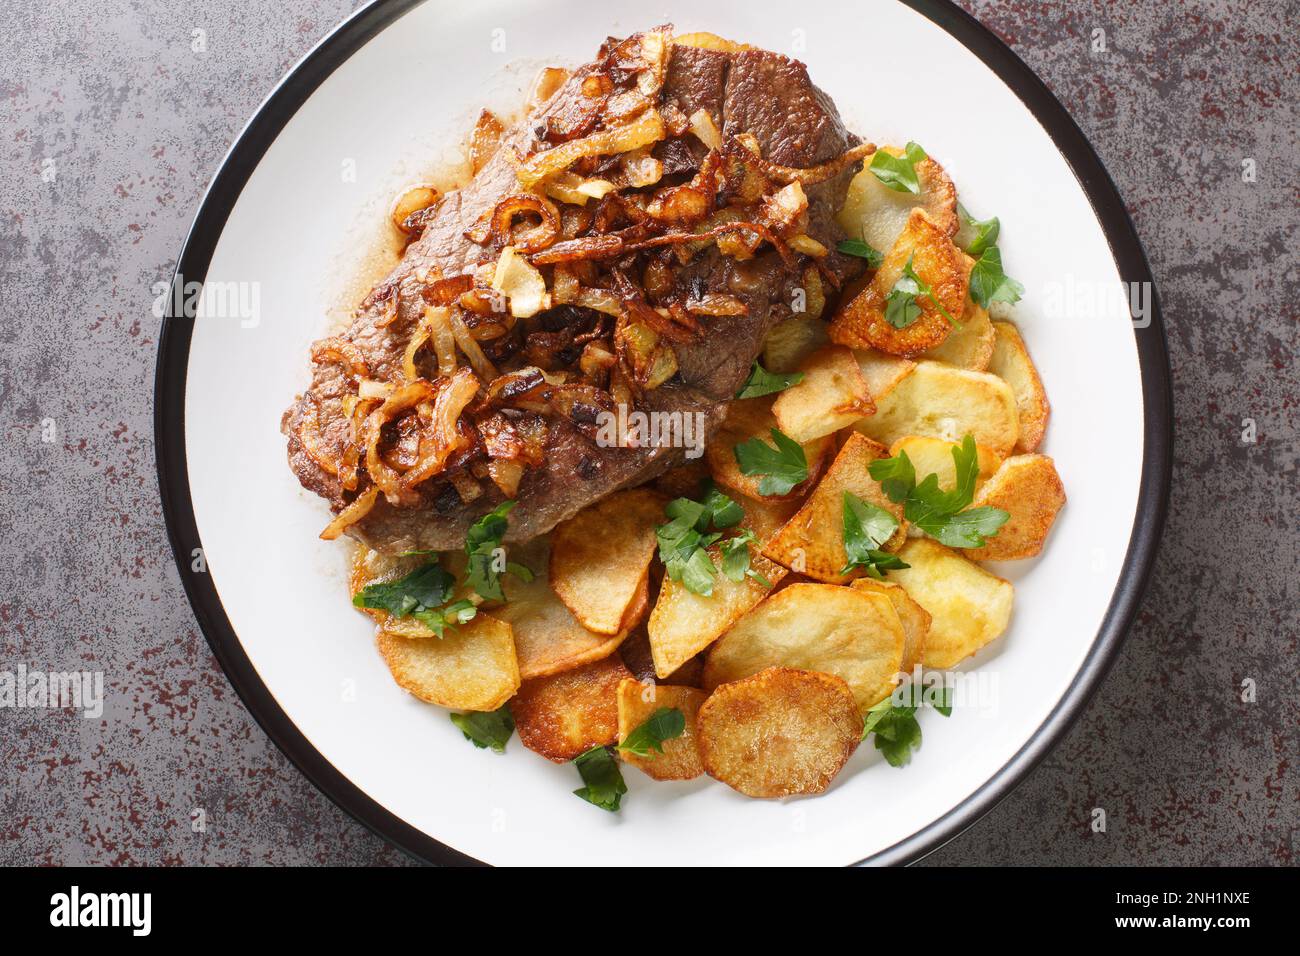 Original and Authentic German Zwiebelrostbraten with onion gravy and fried potatoes Bratkartoffeln closeup on the plate on the table. Horizontal top v Stock Photo